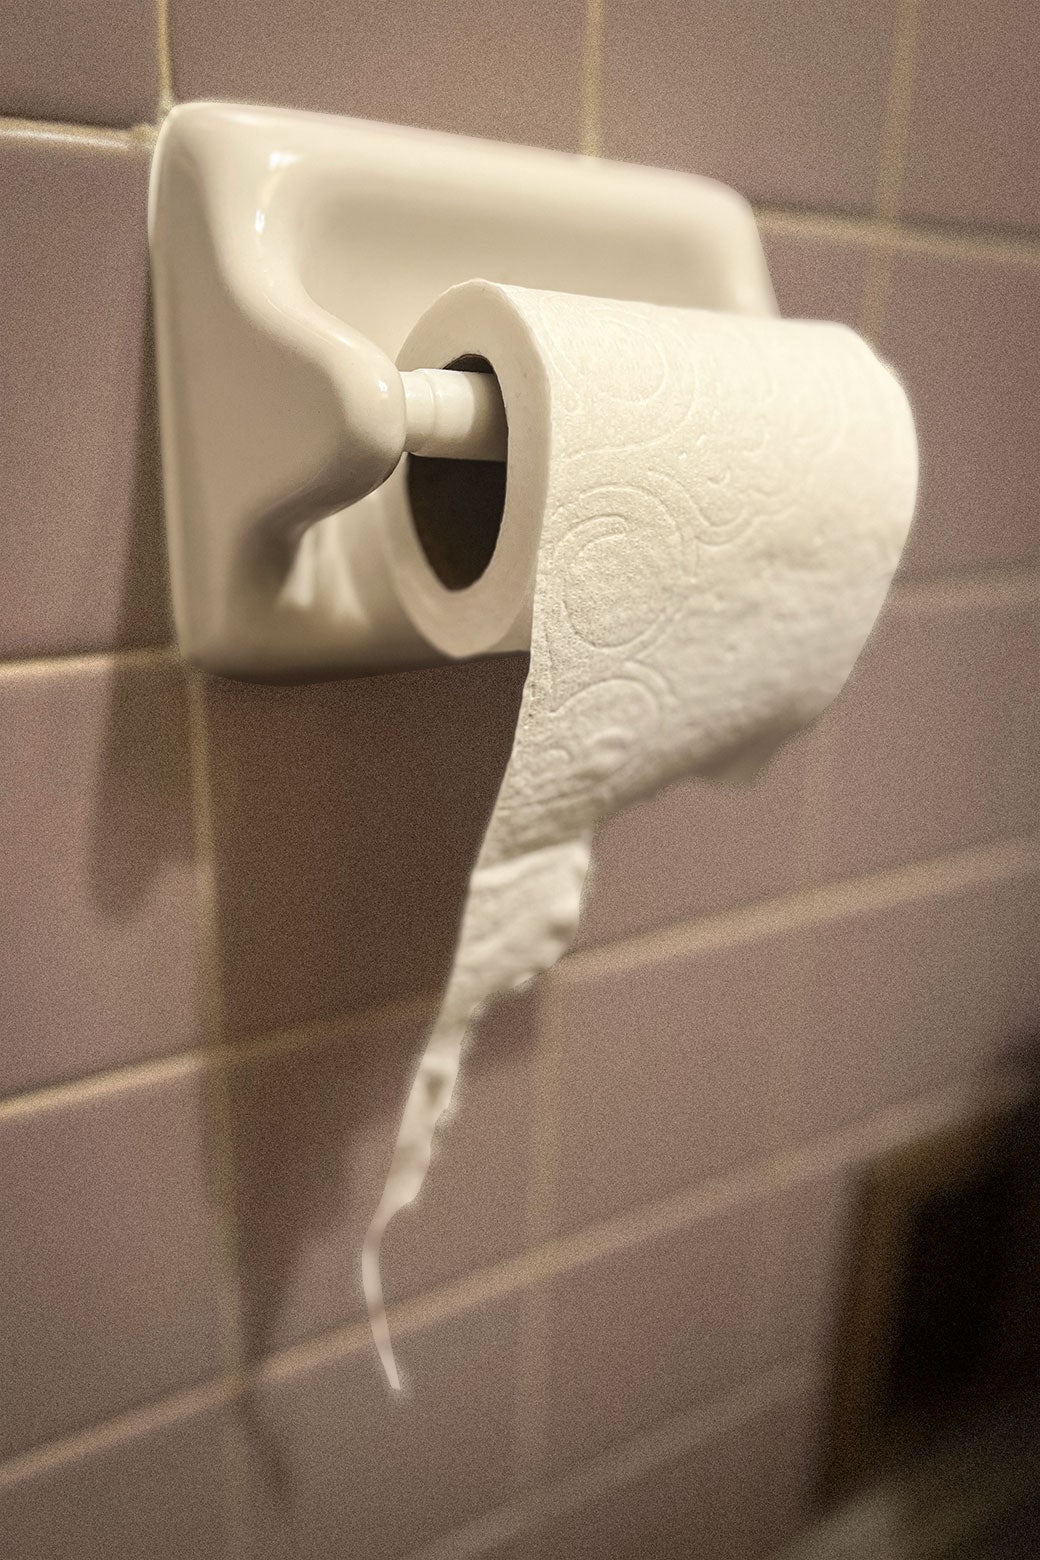 Toilet paper flying off the shelves once again